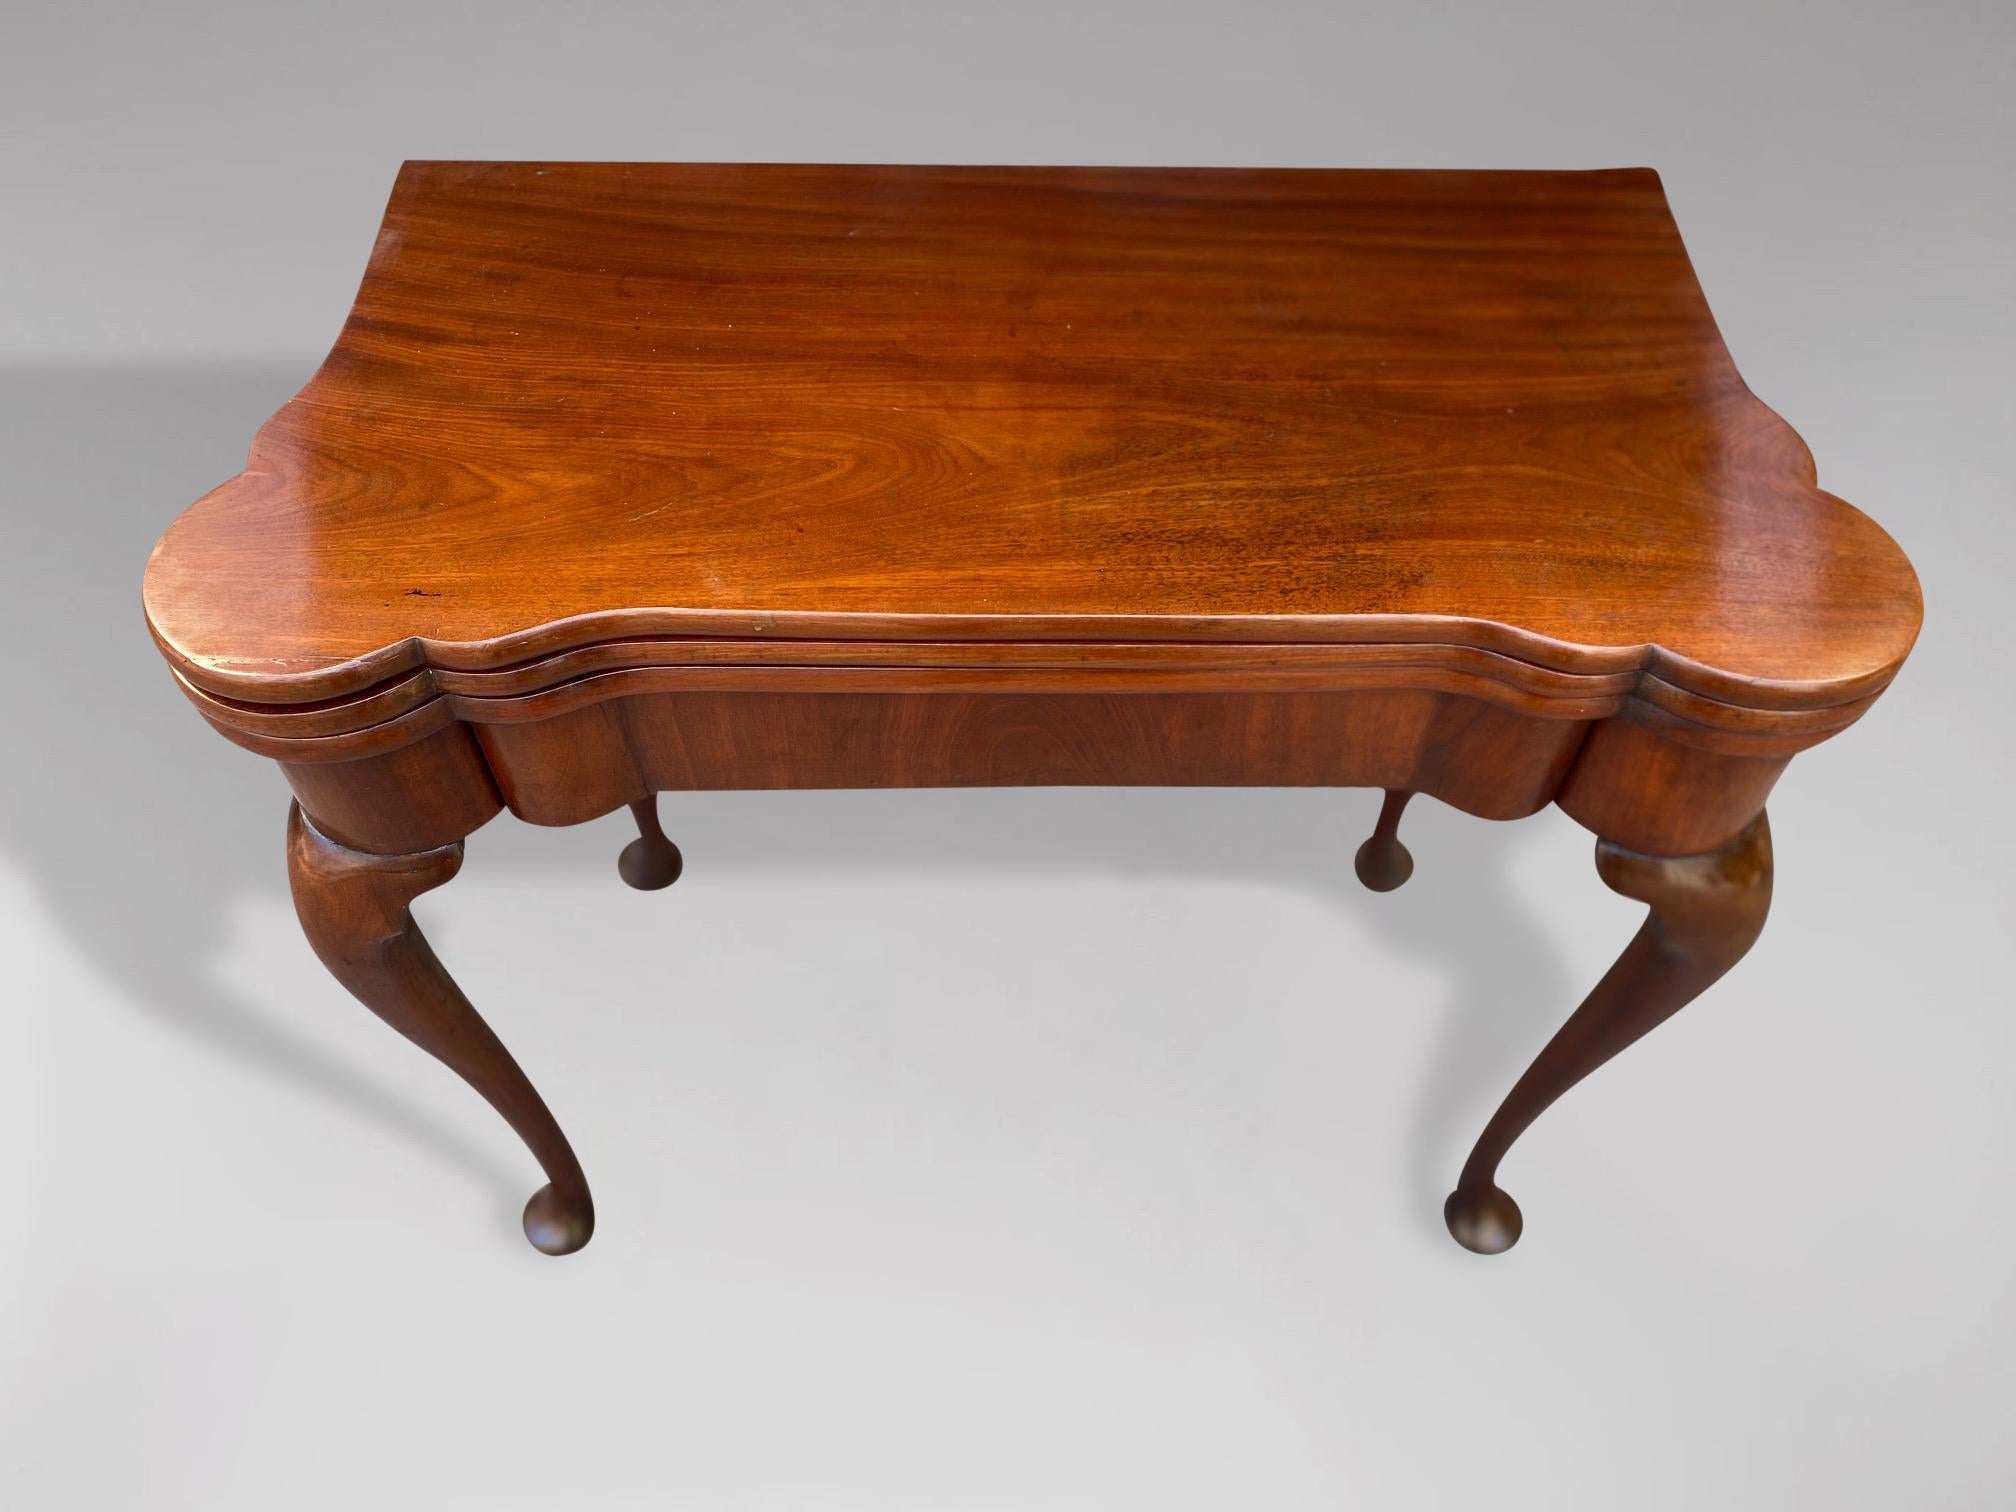 Very Fine Mid 18th Century George II Period Mahogany Triple Top Card Table 5